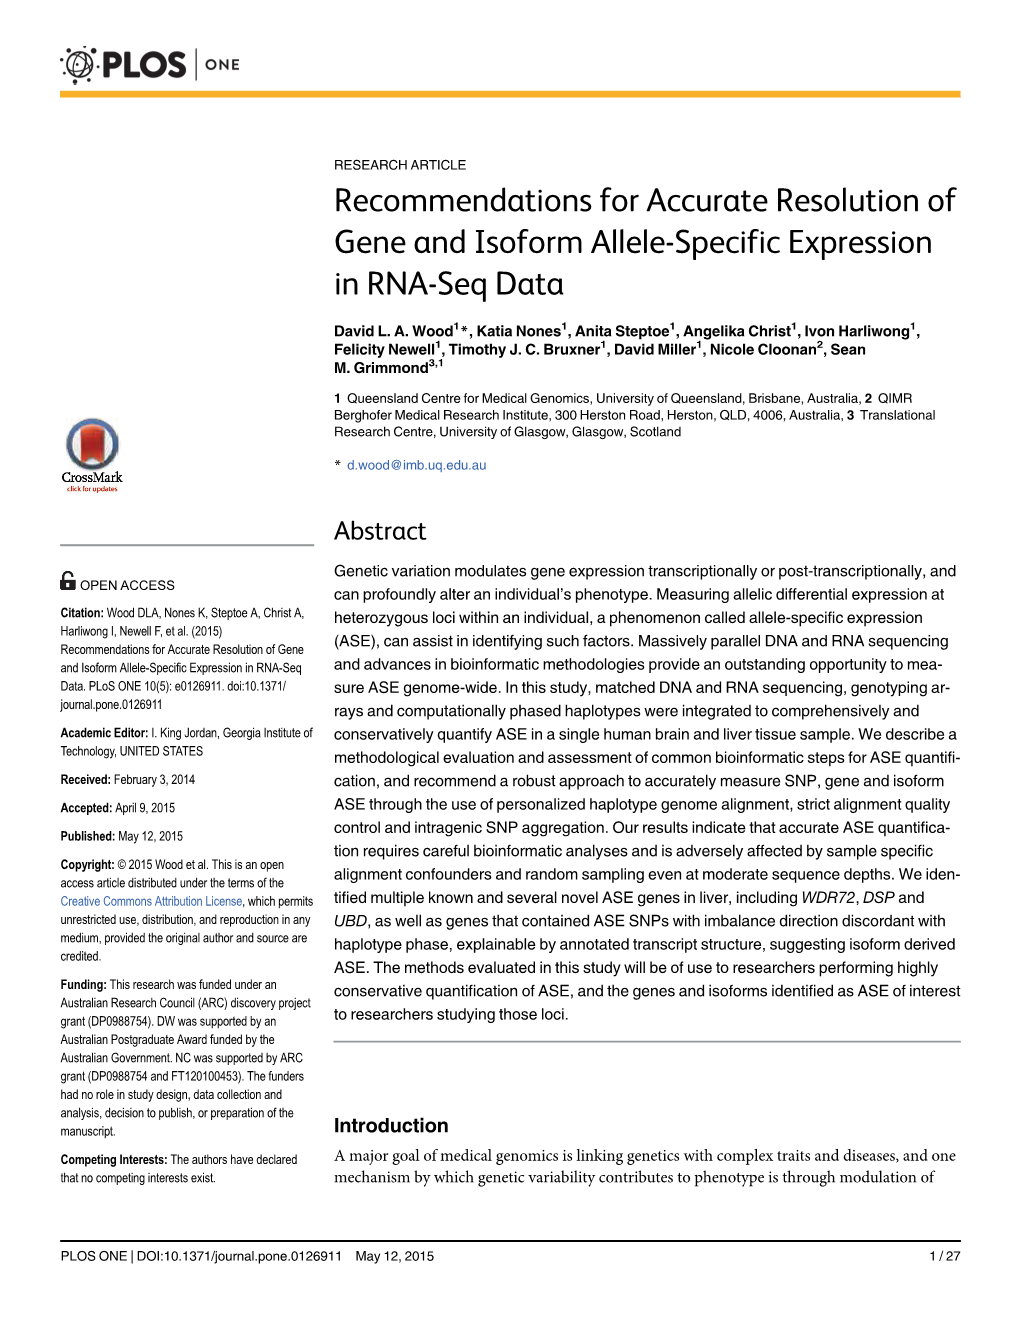 Recommendations for Accurate Resolution of Gene and Isoform Allele-Specific Expression in RNA-Seq Data